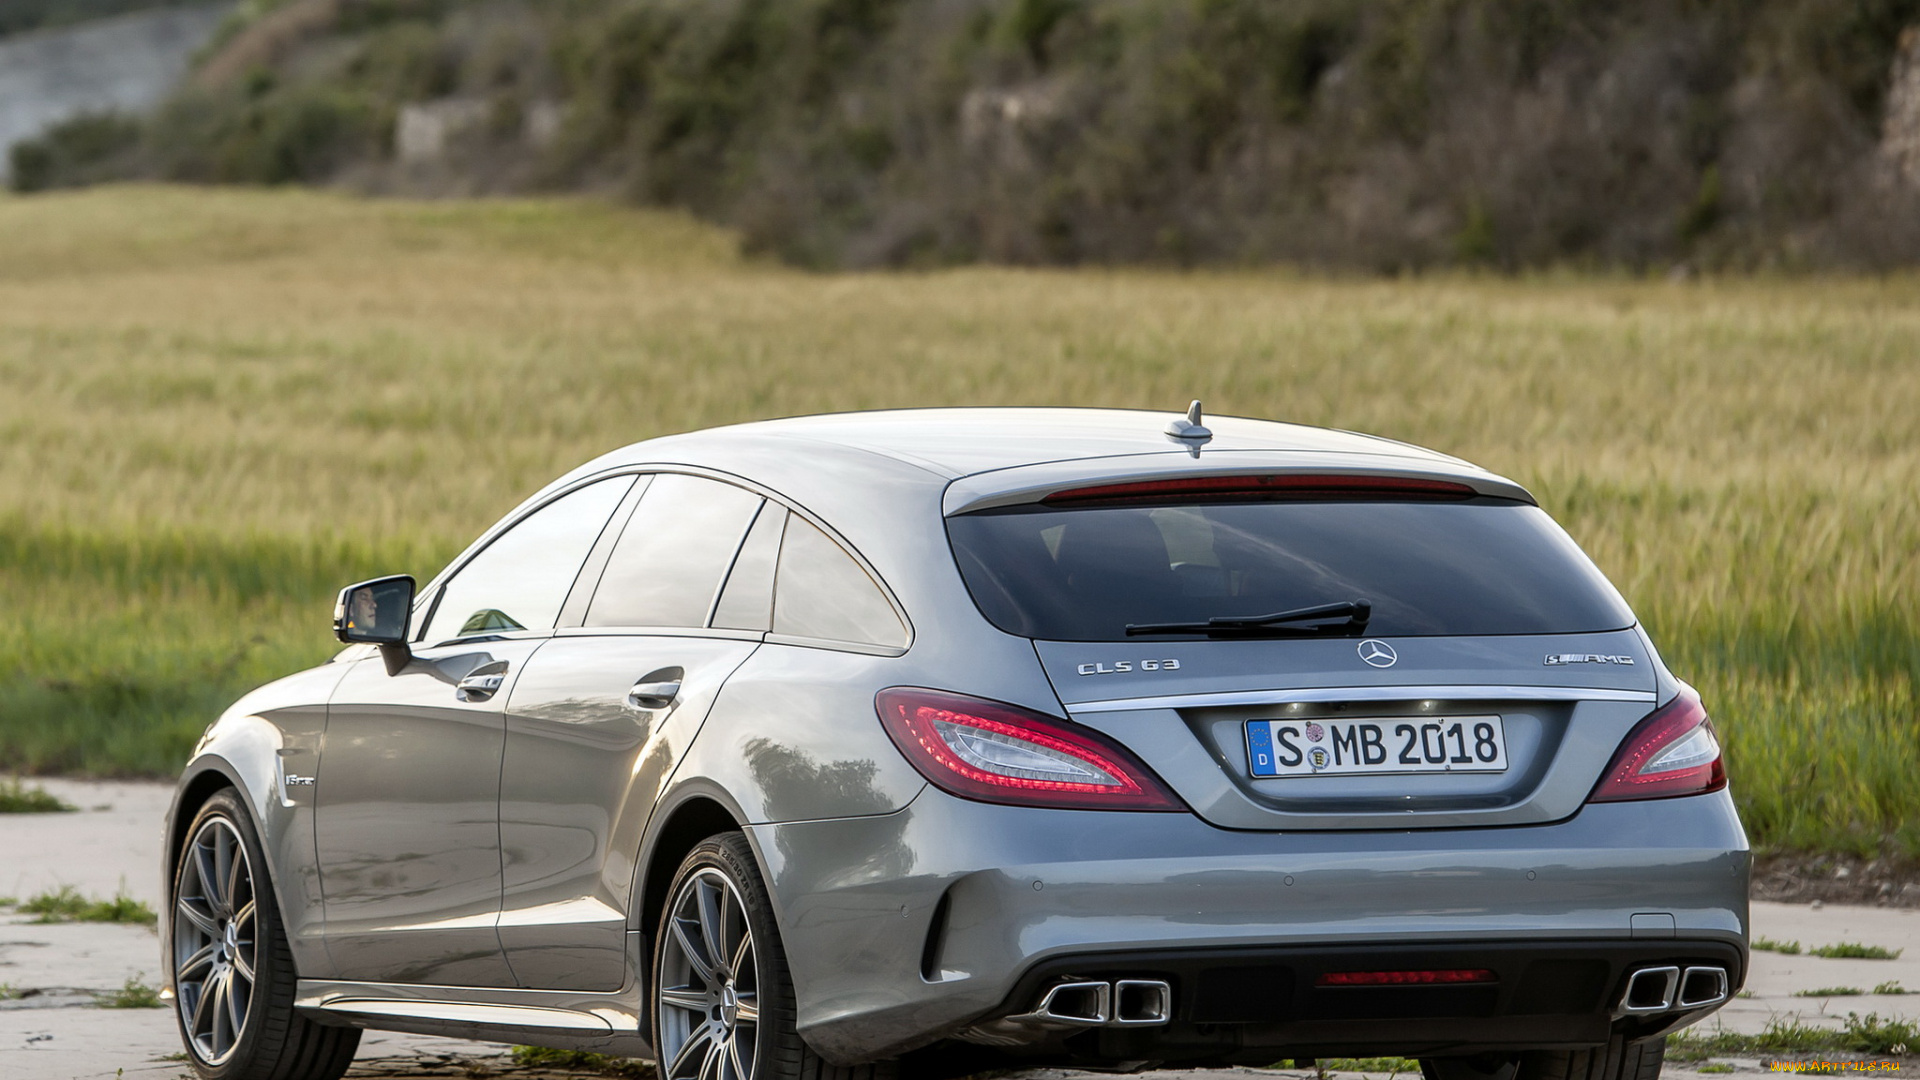 автомобили, mercedes-benz, 400, brake, amg, cls, shooting, x218, sports, package, светлый, 2014г